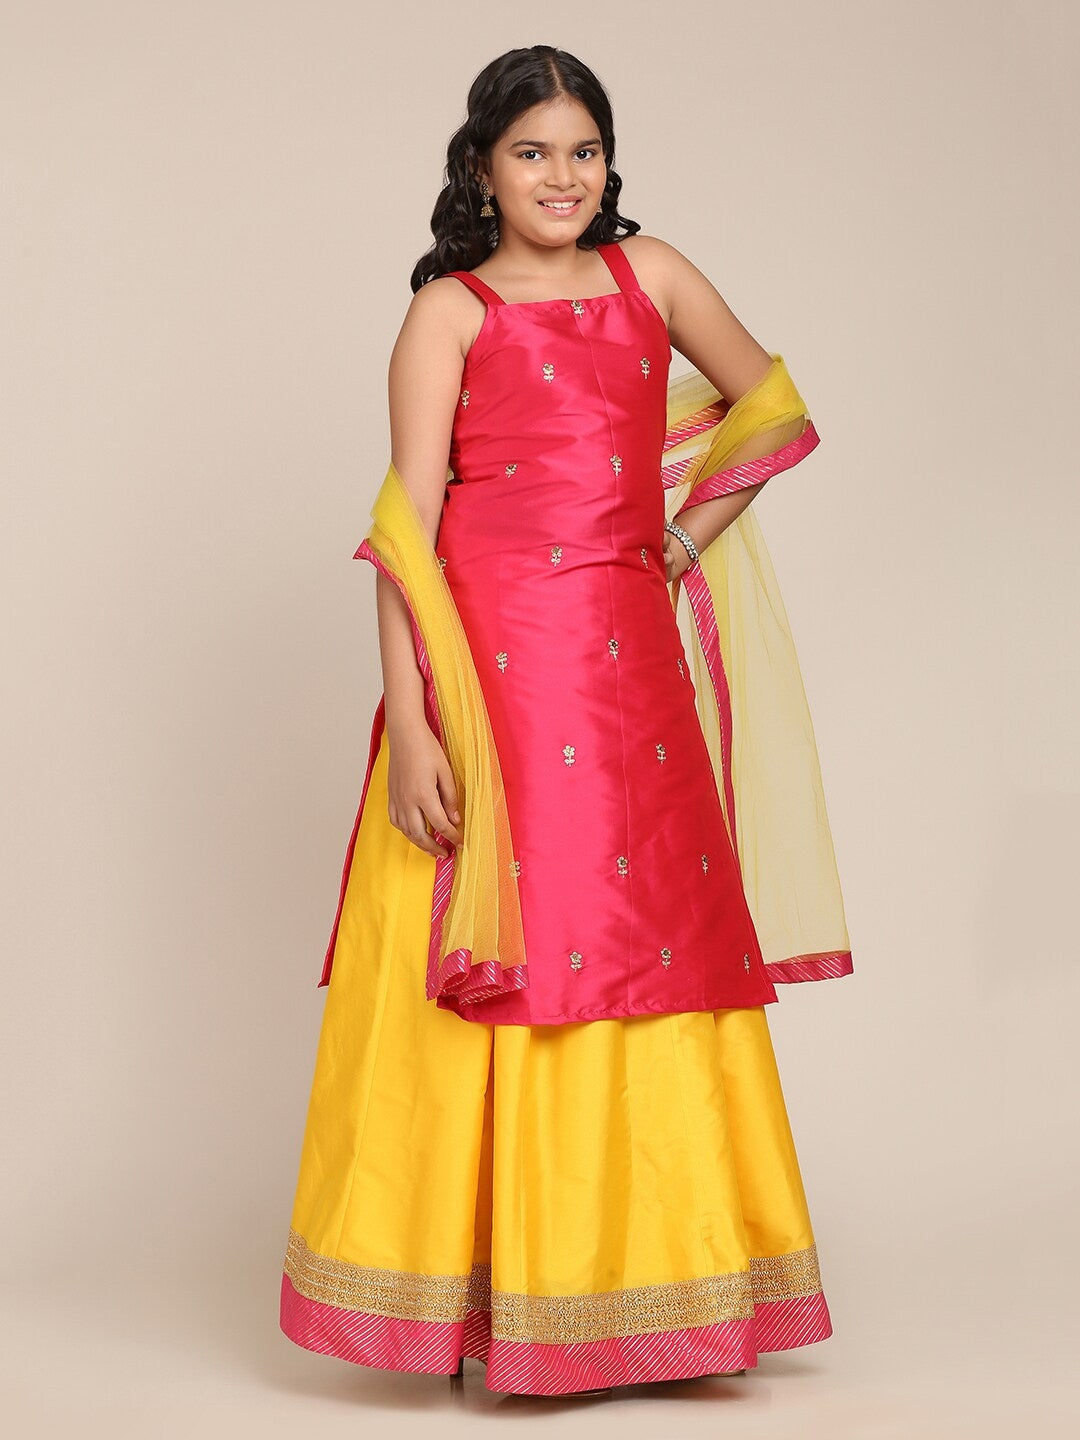 Girl's Pink & Yellow Embroidered Ready to Wear Lehenga & Blouse With Dupatta - NOZ2TOZ KIDS